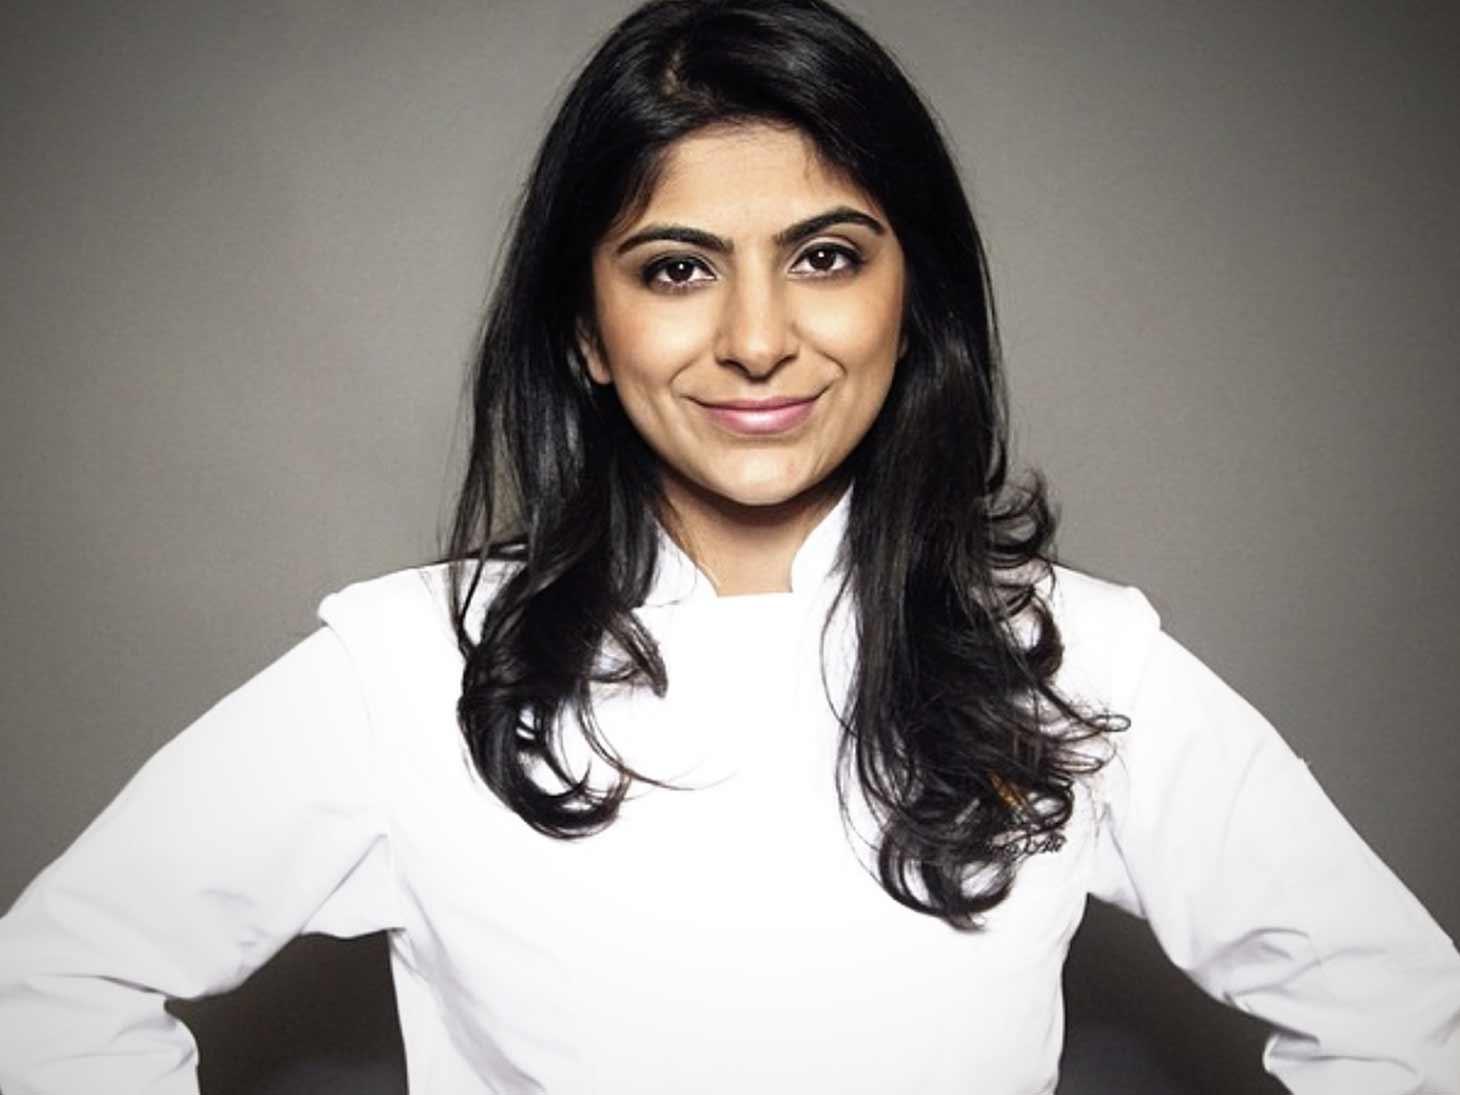 ‘Top Chef’ Star Fatima Ali Passes After Cancer Battle